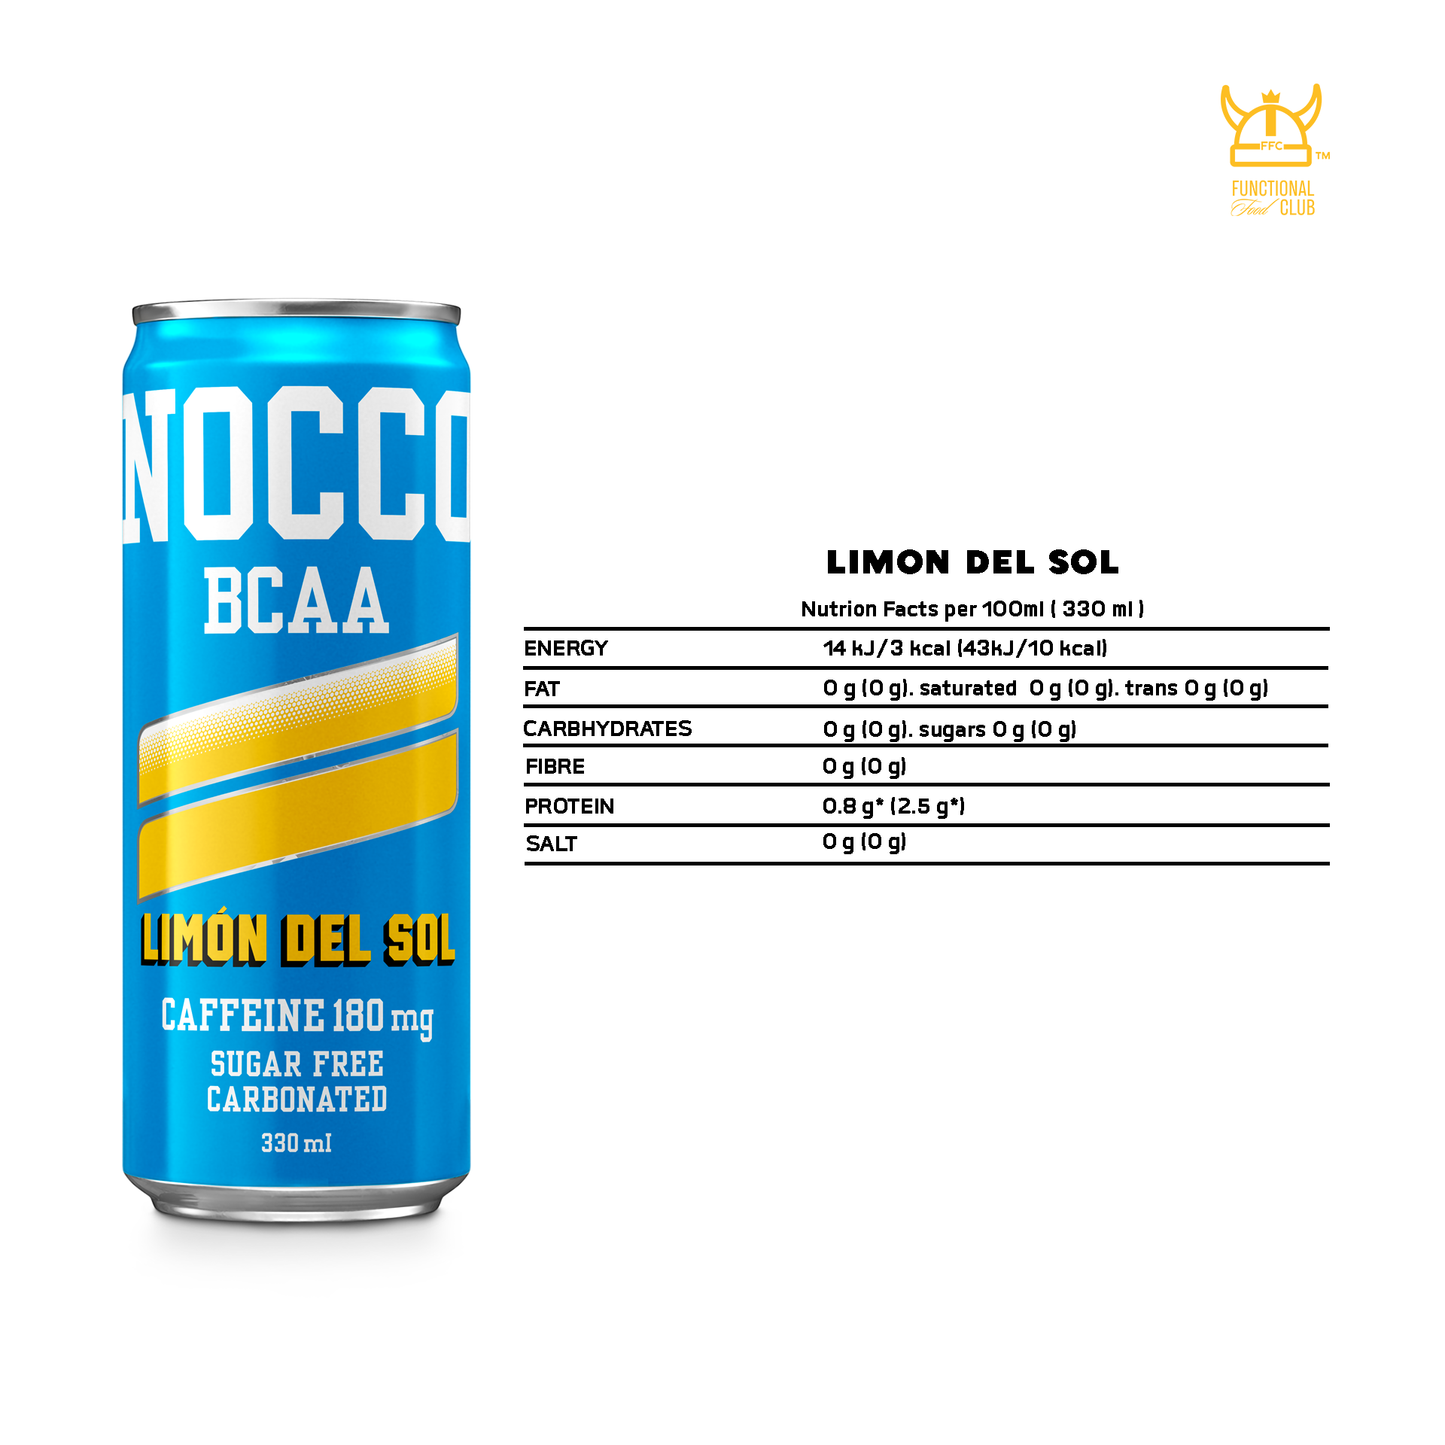 NOCCO BCAA Multi-vitamins Performance Drink - Limón Del Sol (Caffeinated) 24 Cans